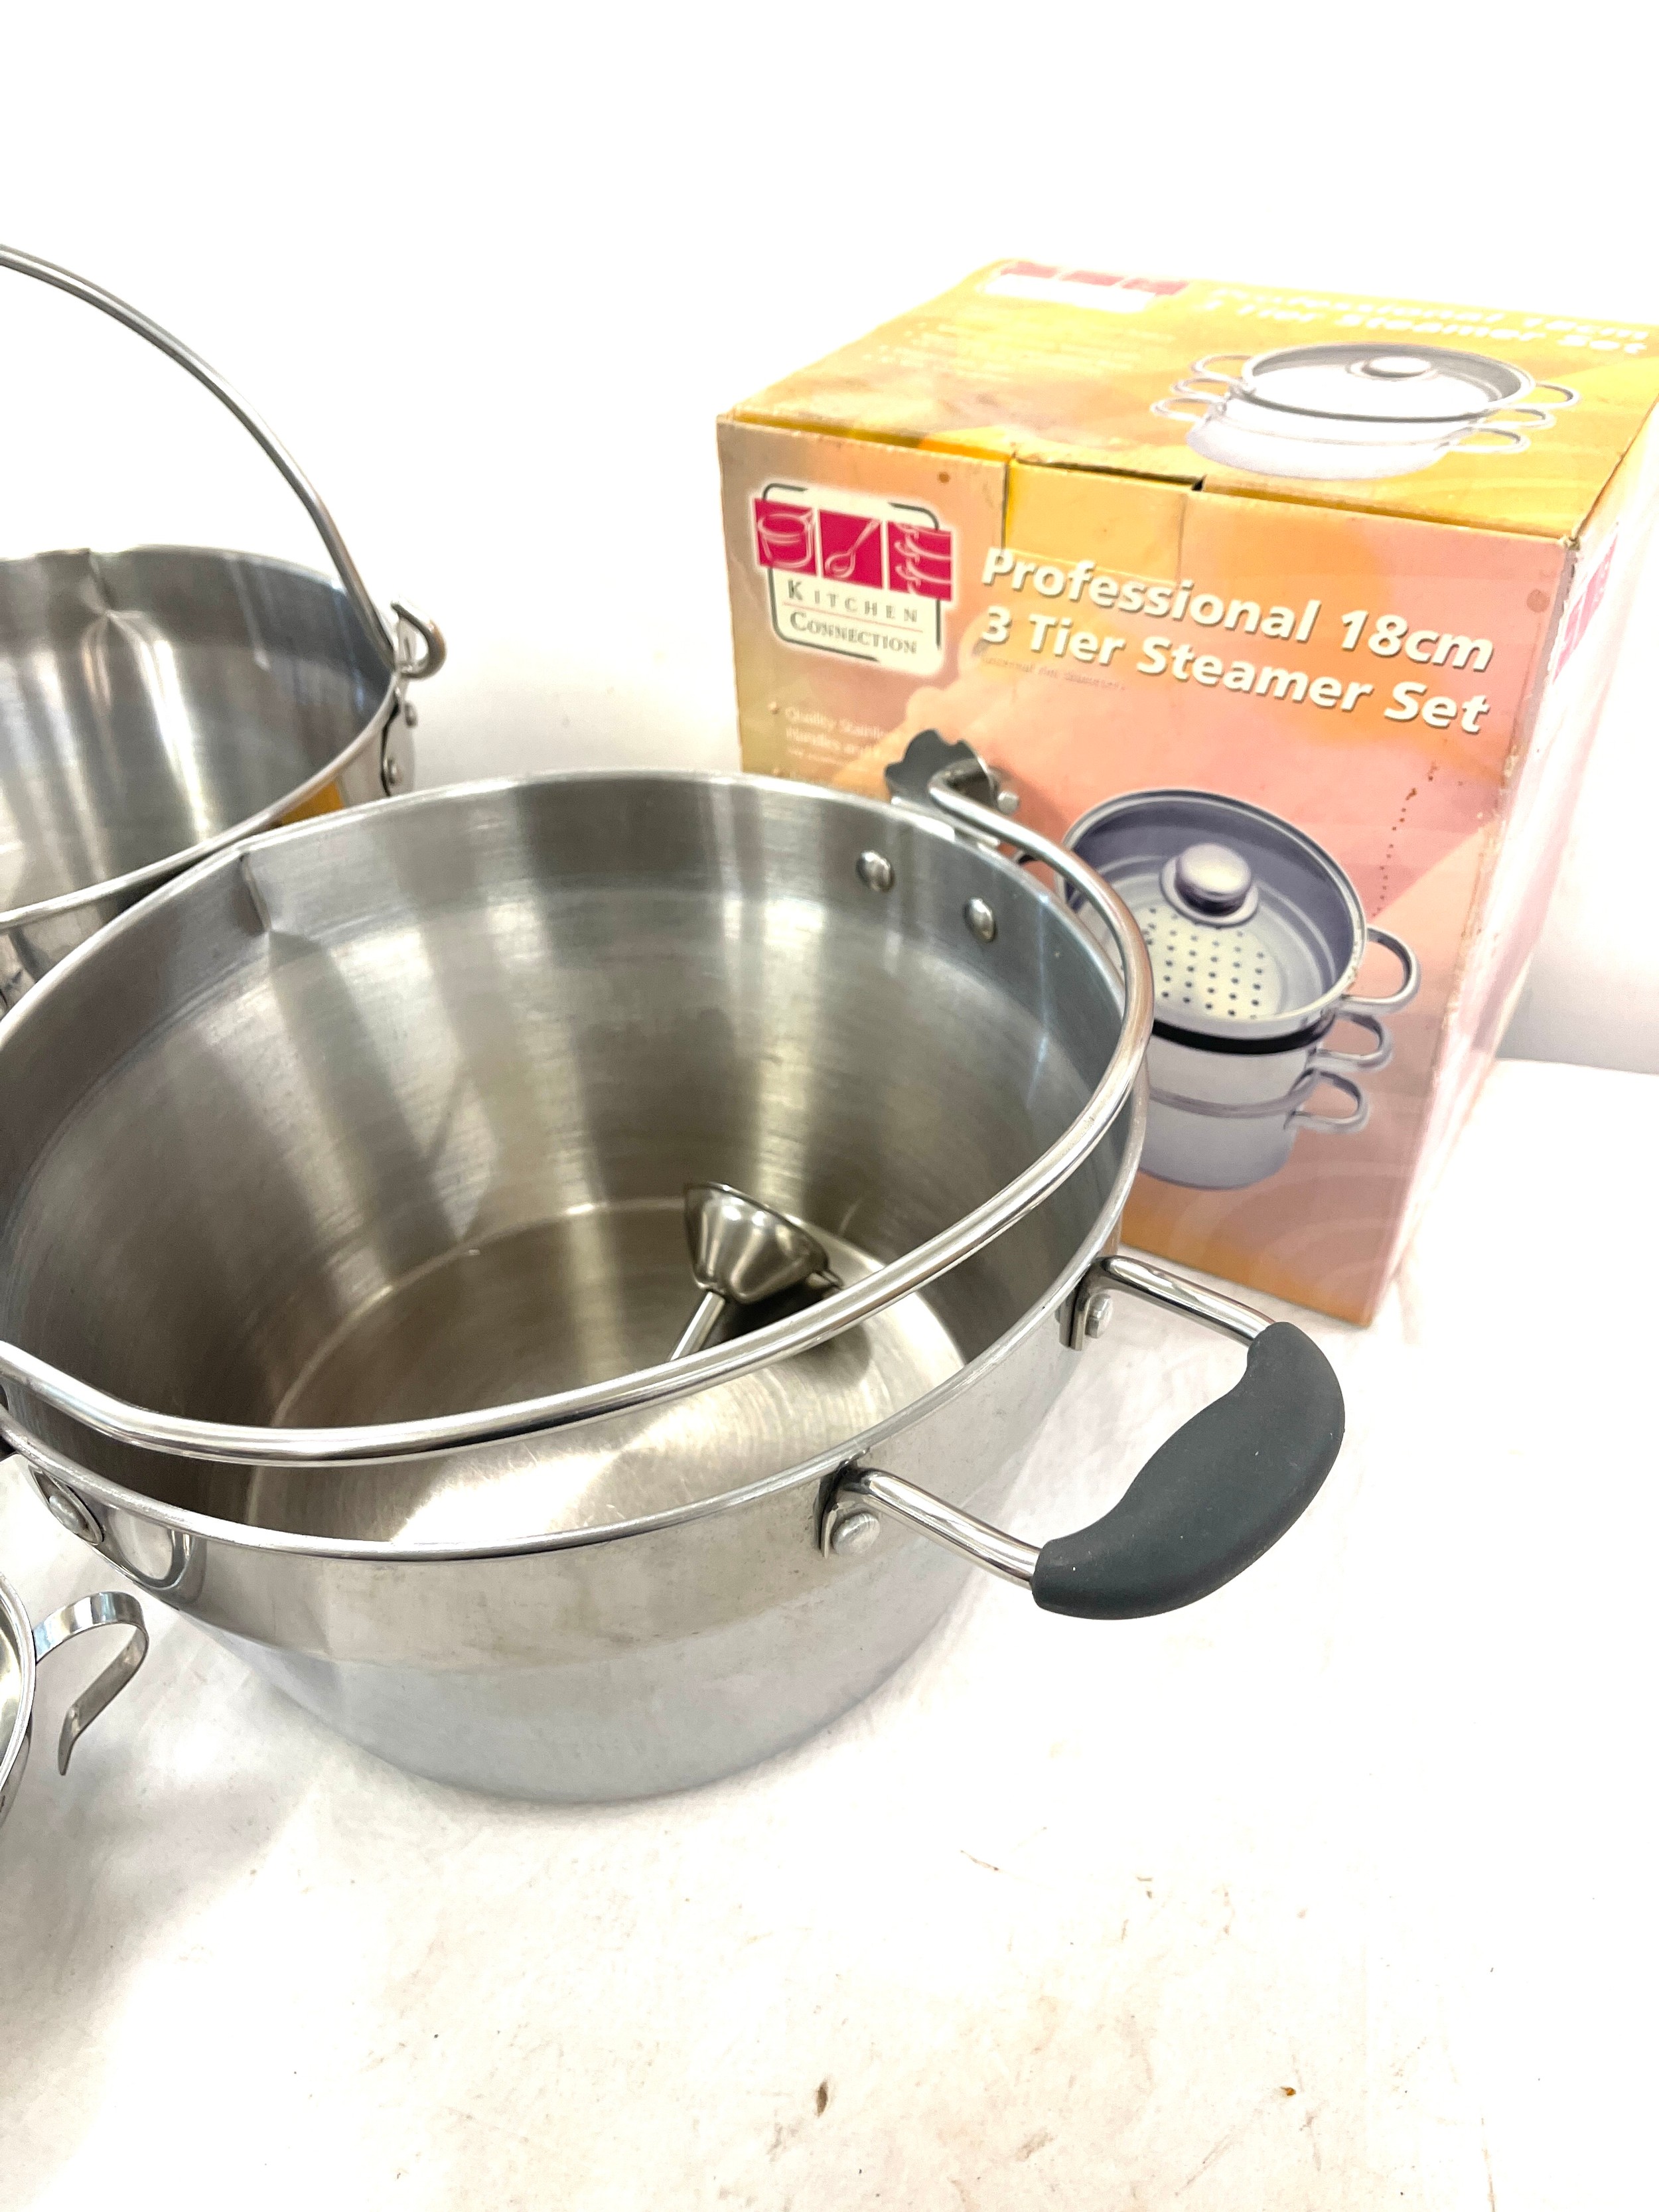 2 Large stainless steel pans, steamer etc, pan diameter approximately 12 inches - Image 2 of 3